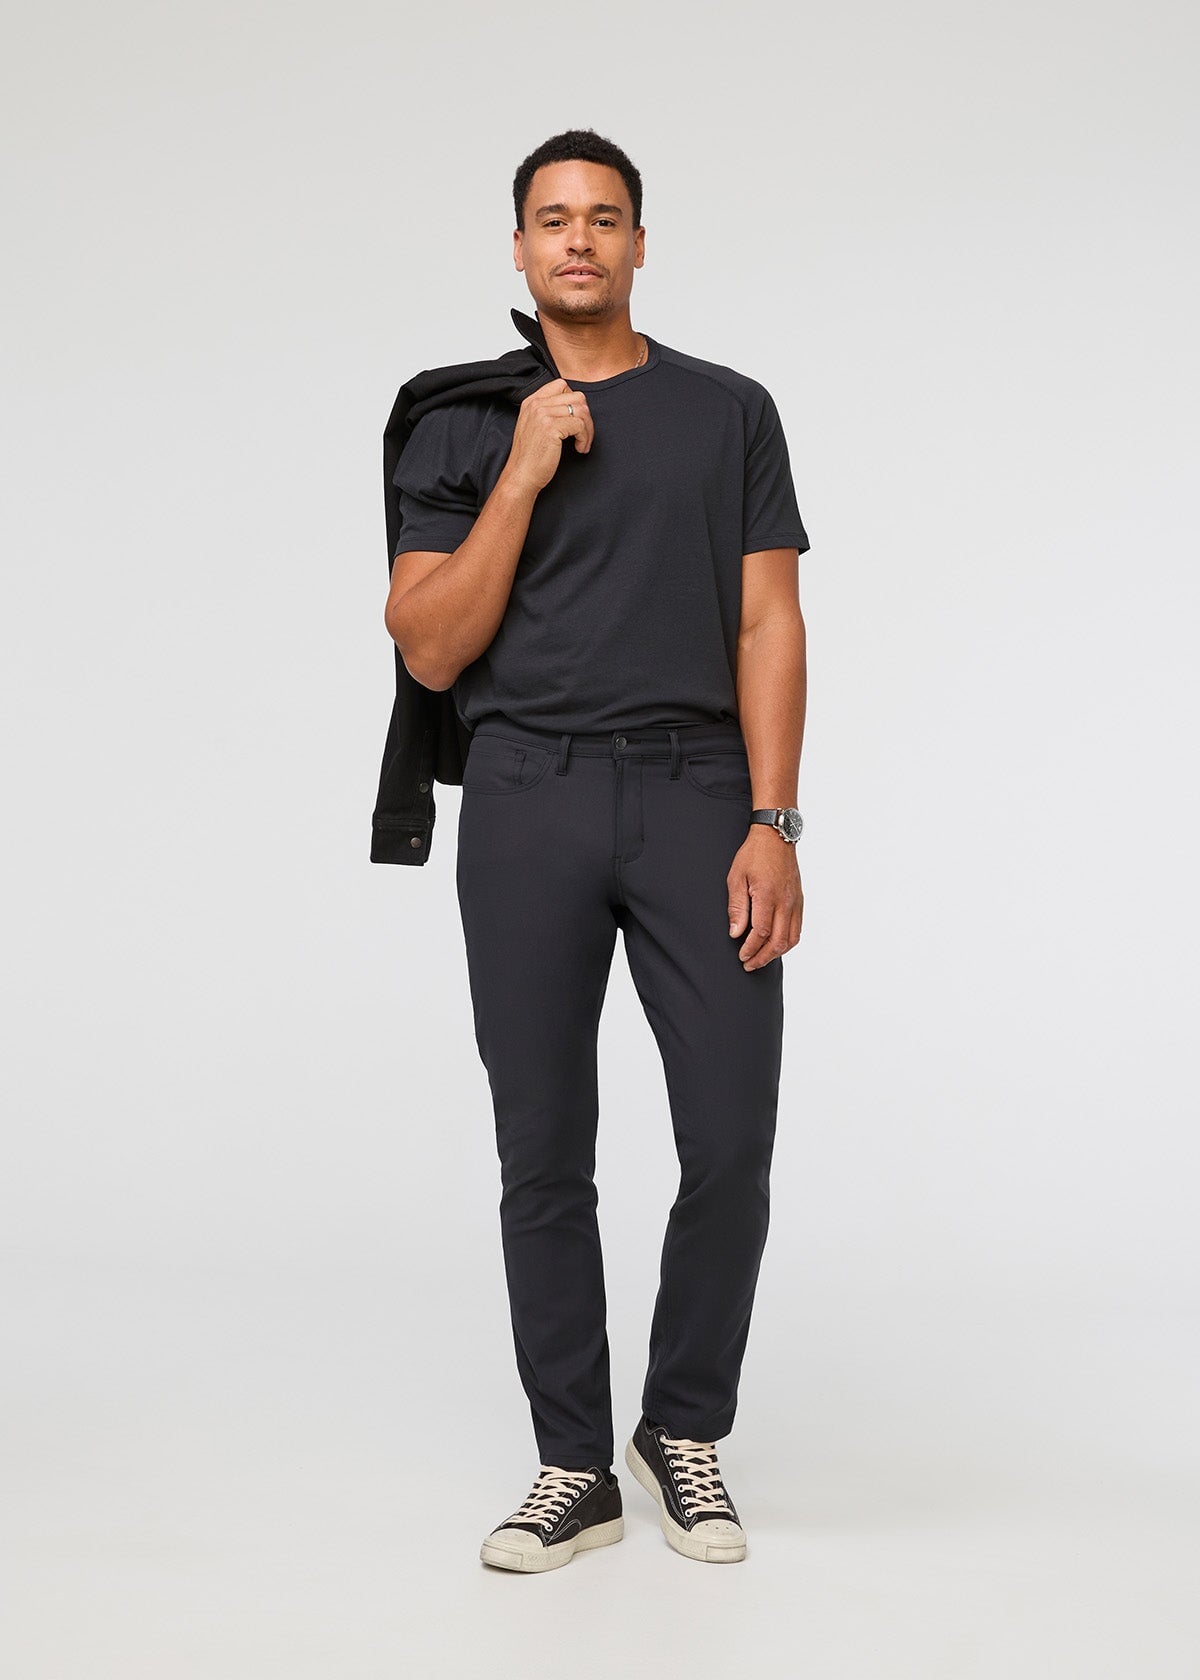 Everyday Comfort 5-Pocket TAPERED-FIT Pant for Tall Men in Dark Sand